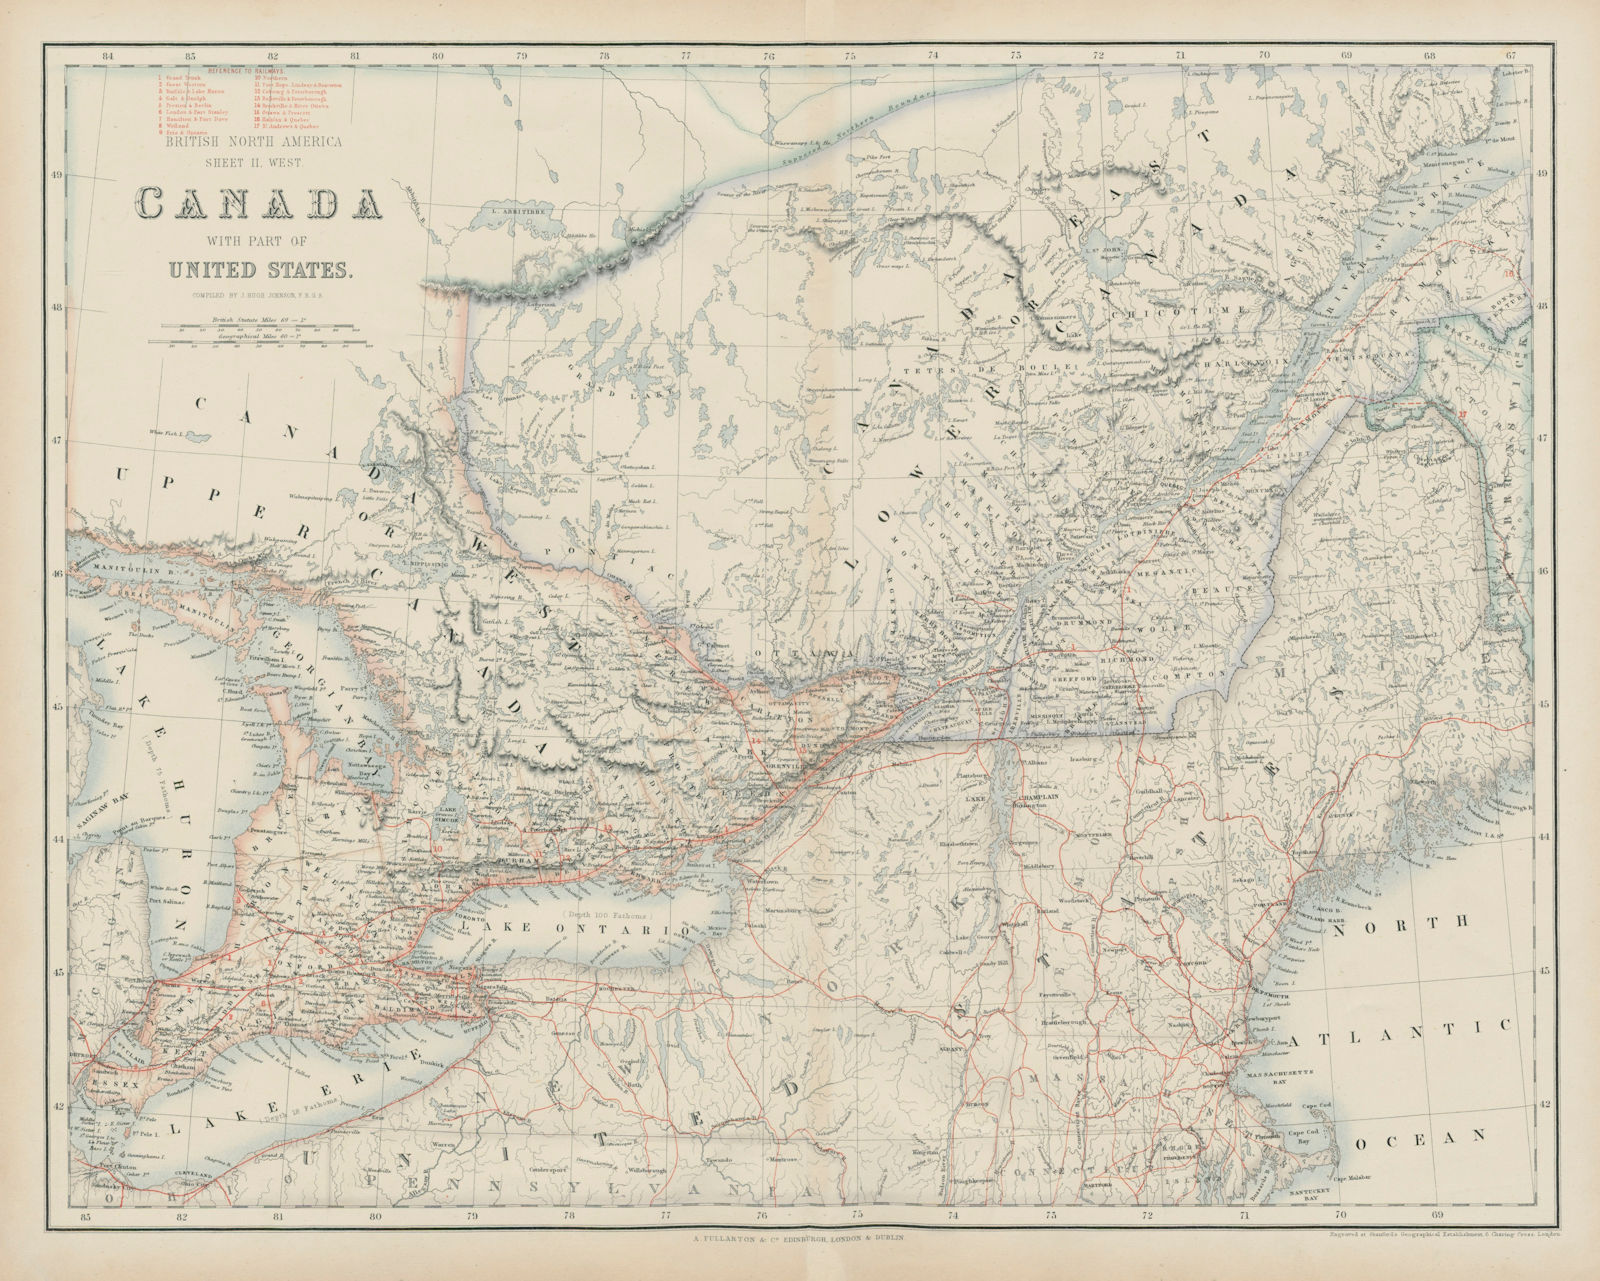 Associate Product Canada with part of United States. West. Ontario & Quebec. SWANSTON 1860 map